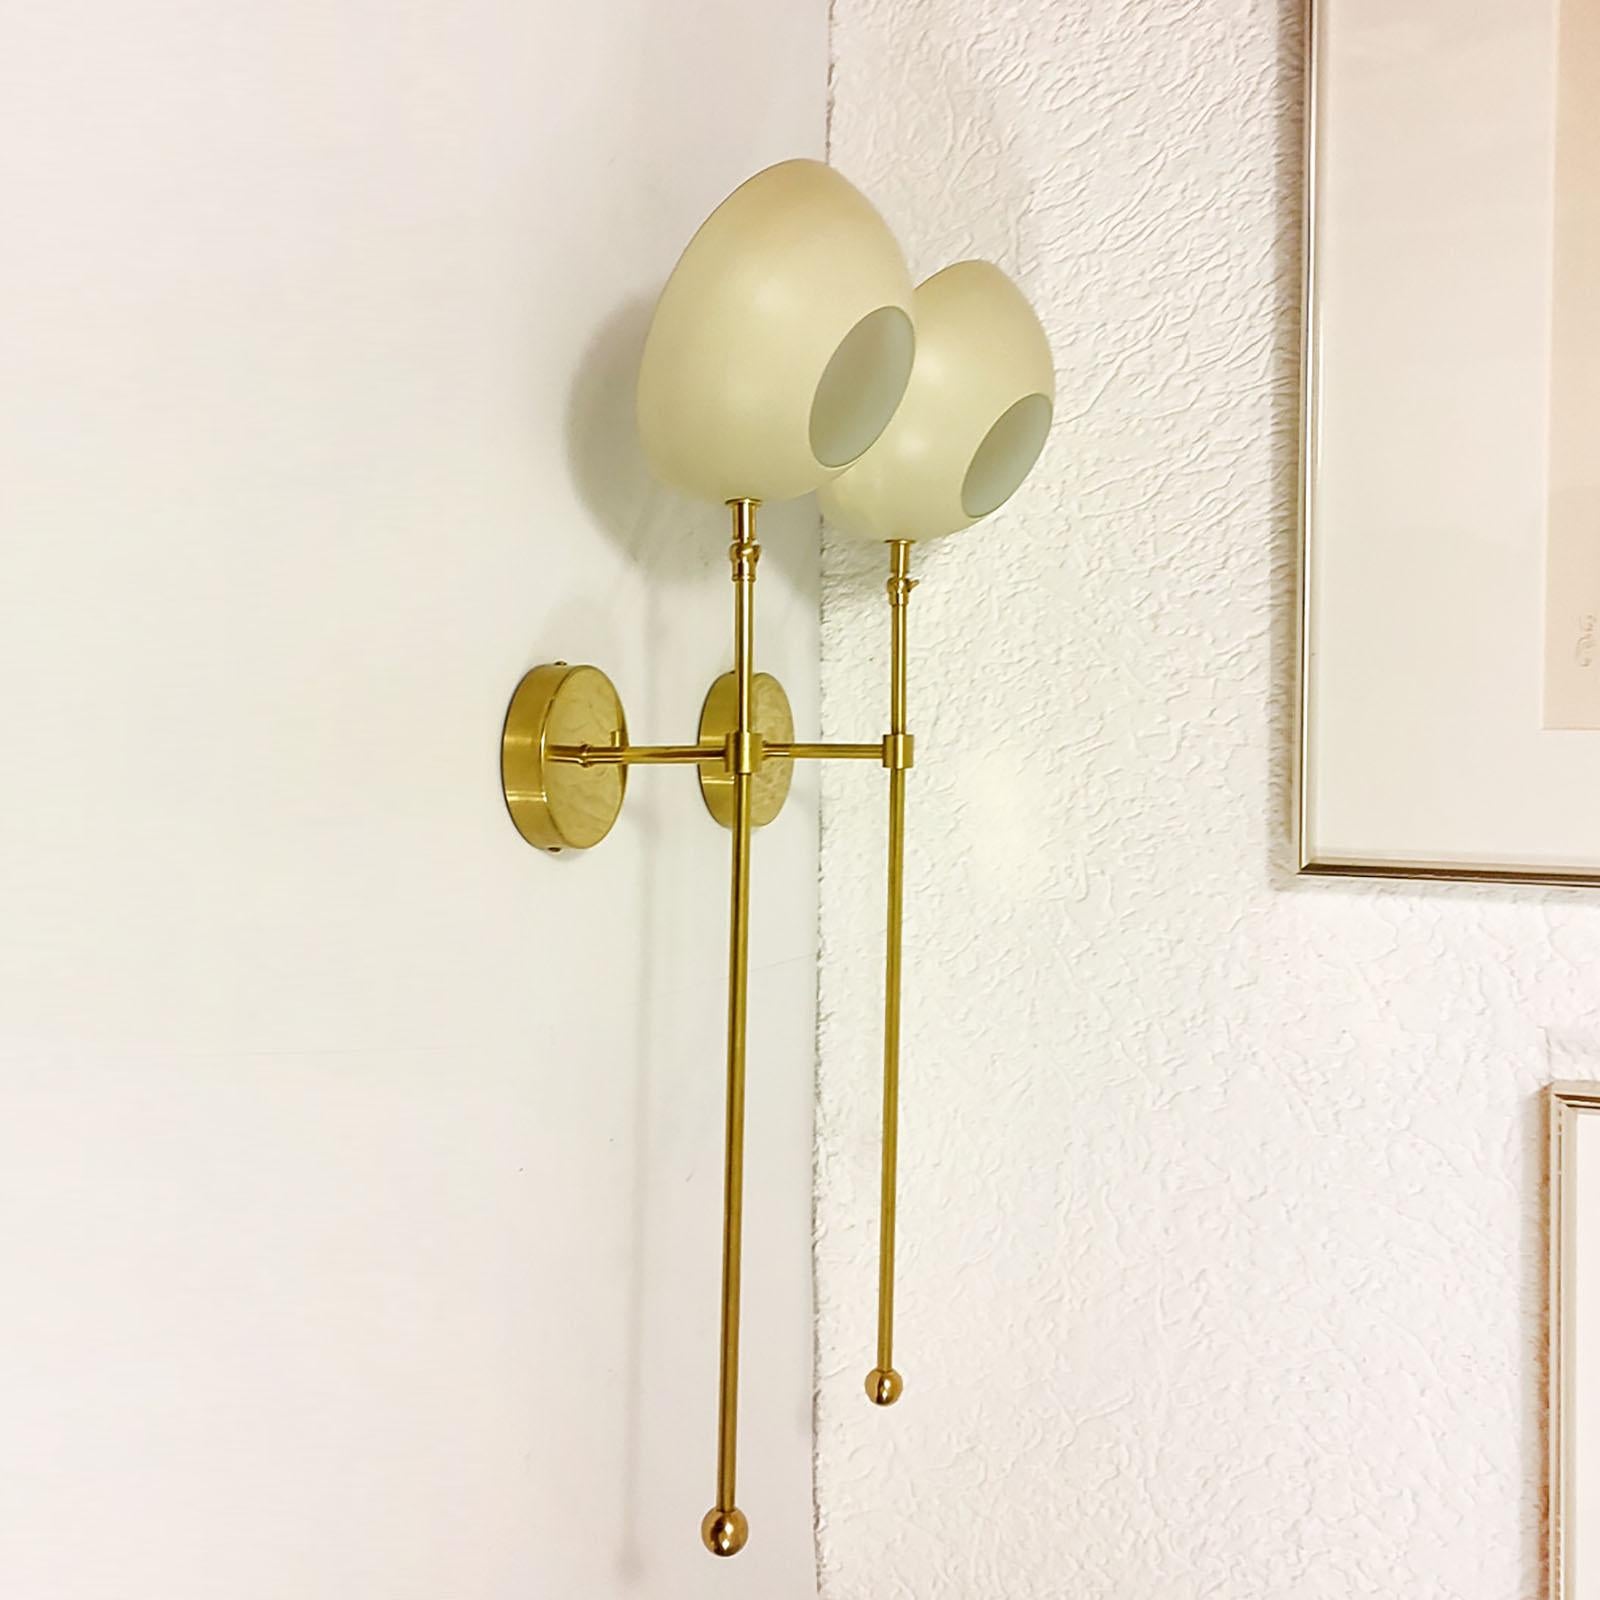 Pair of Italian Wall Lights, Brass and Ivory Lacquer, Stilnovo Style For Sale 4